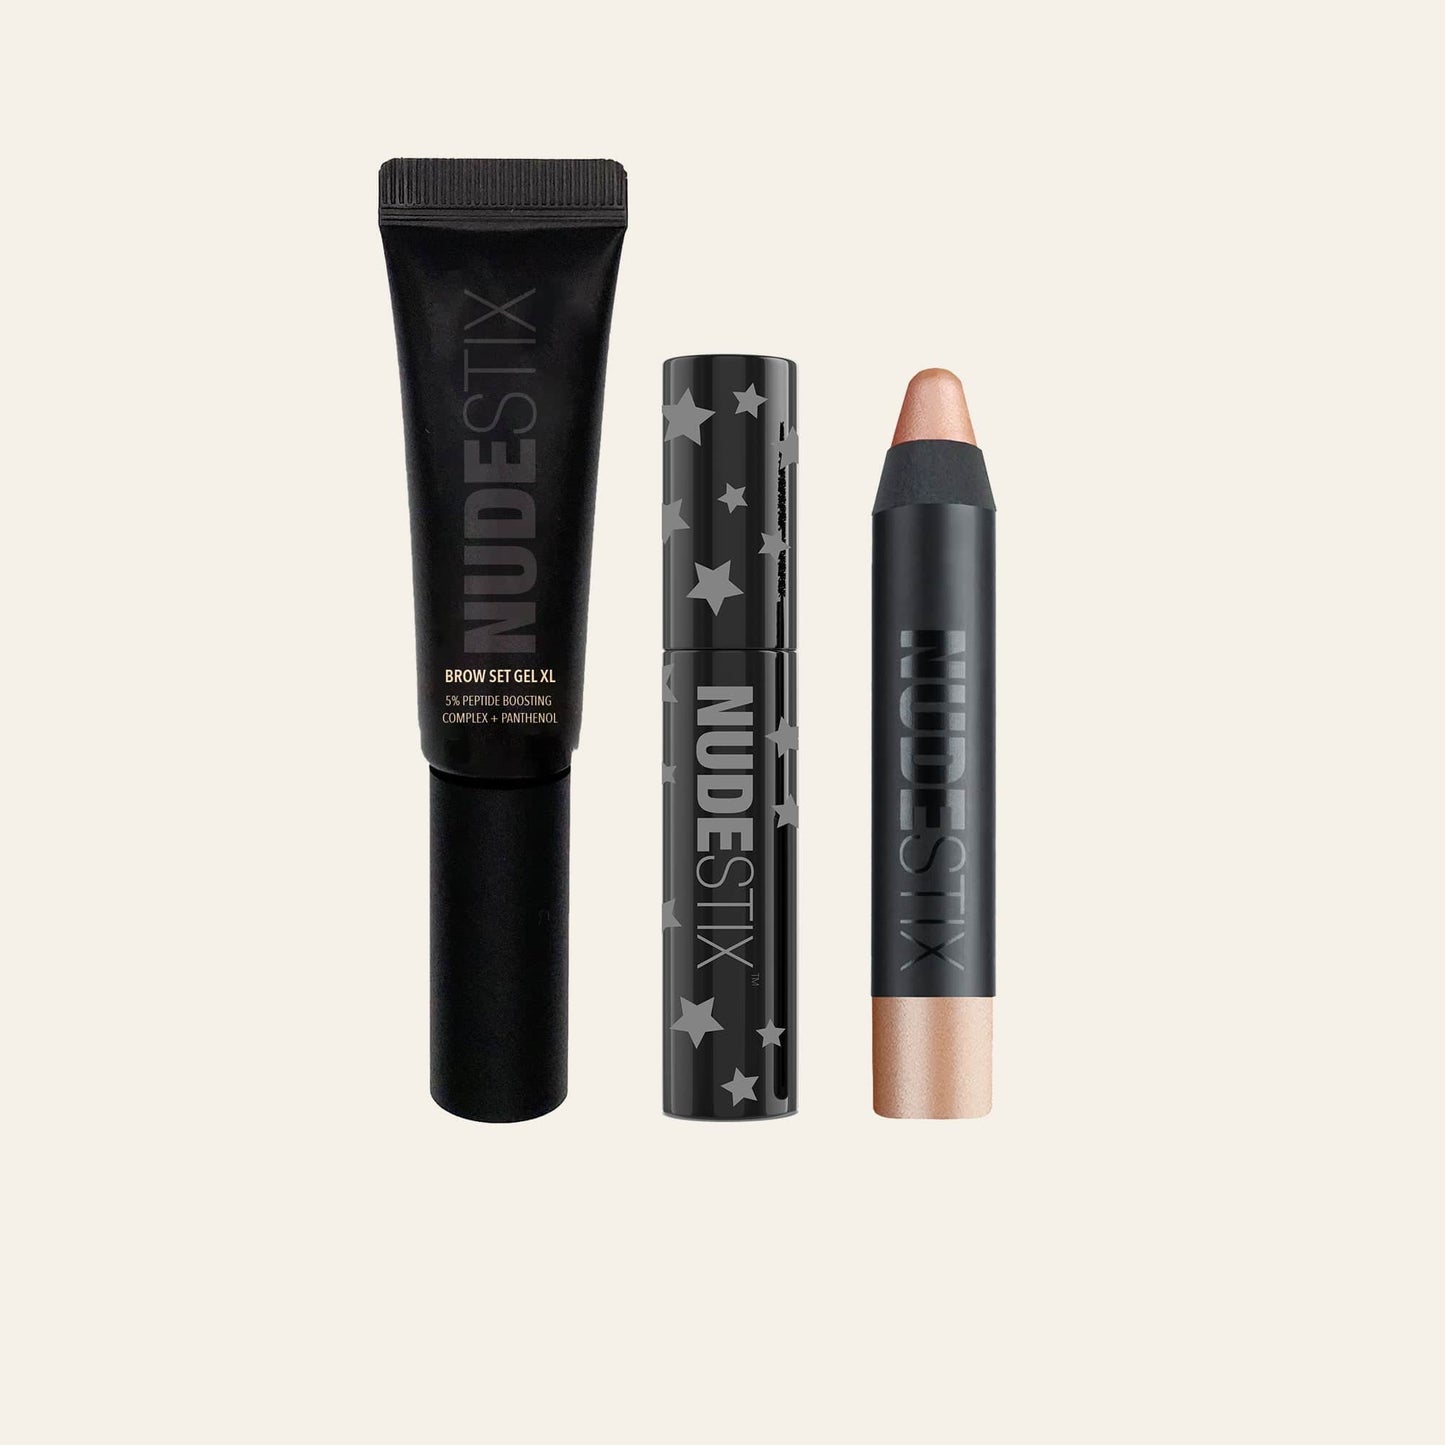 Nude Eye, Brow and Lashes Kit